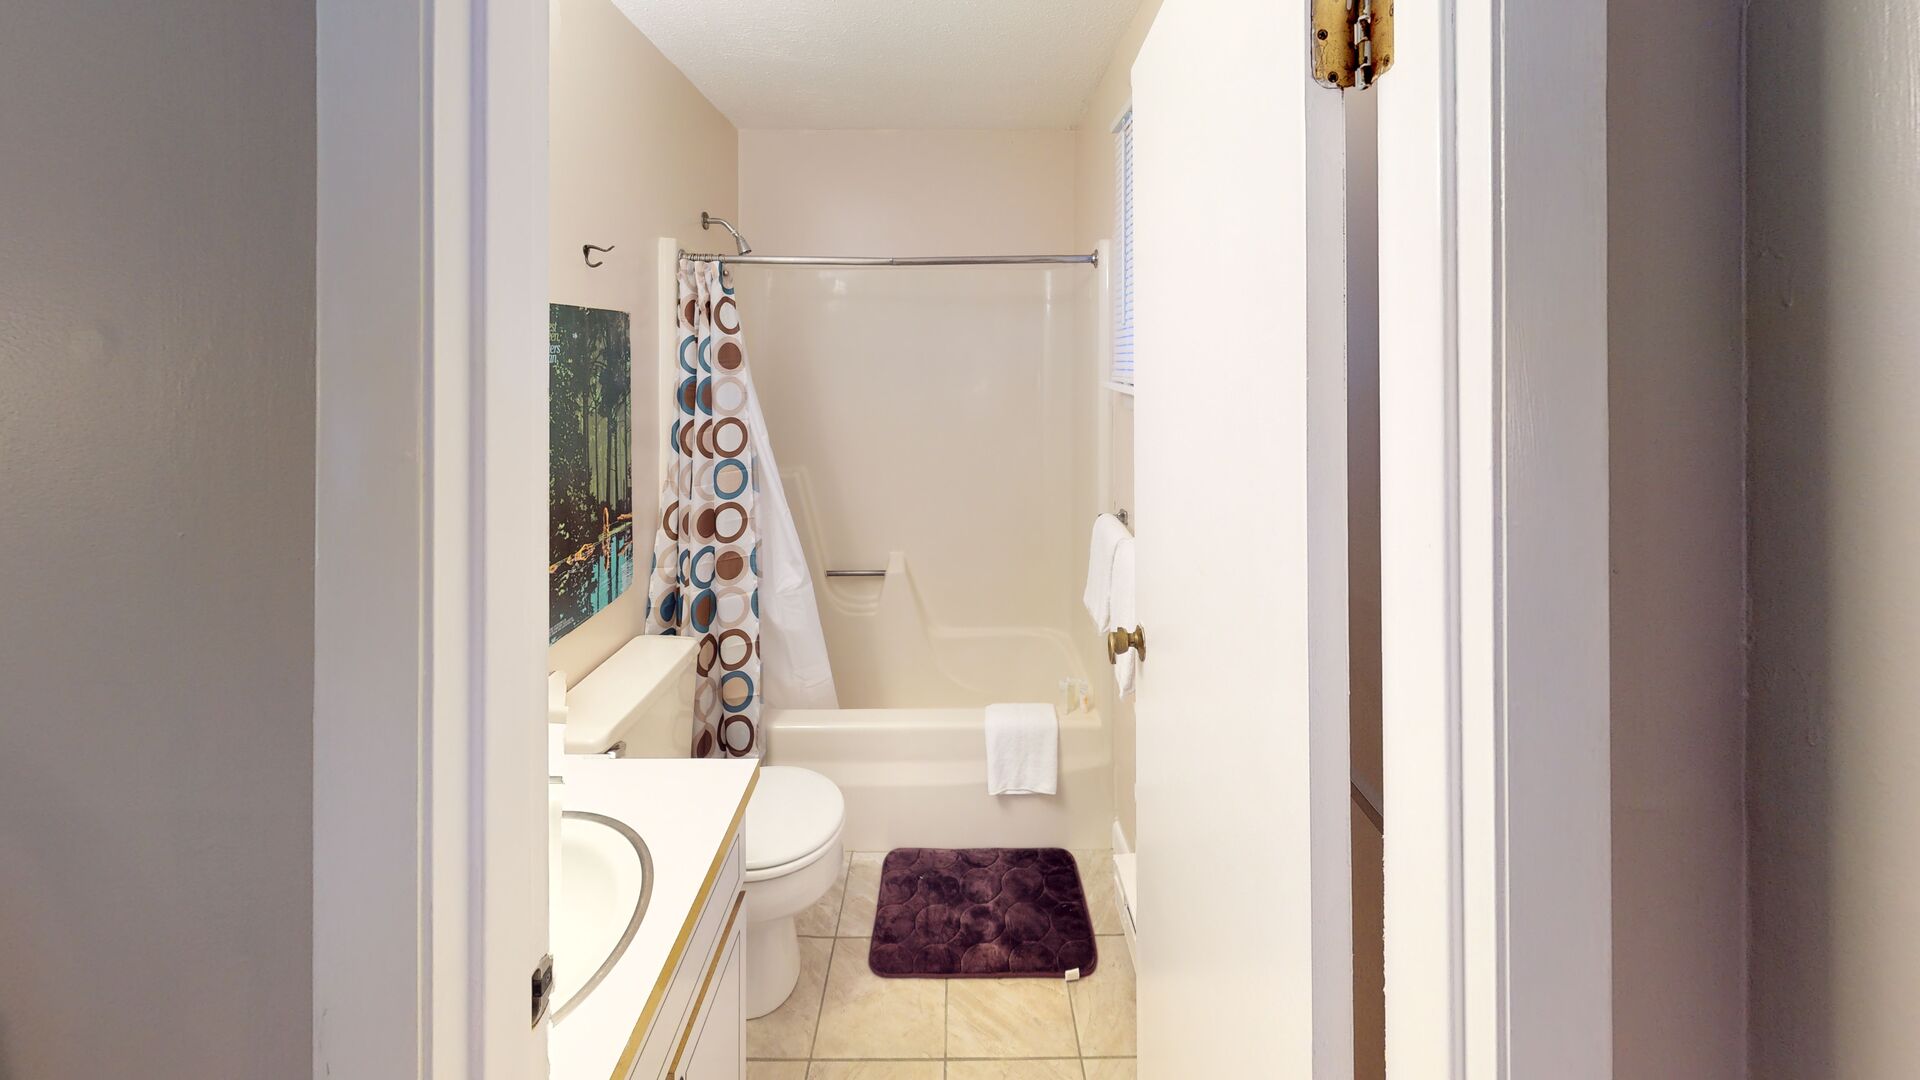 Shared full bath with lower level